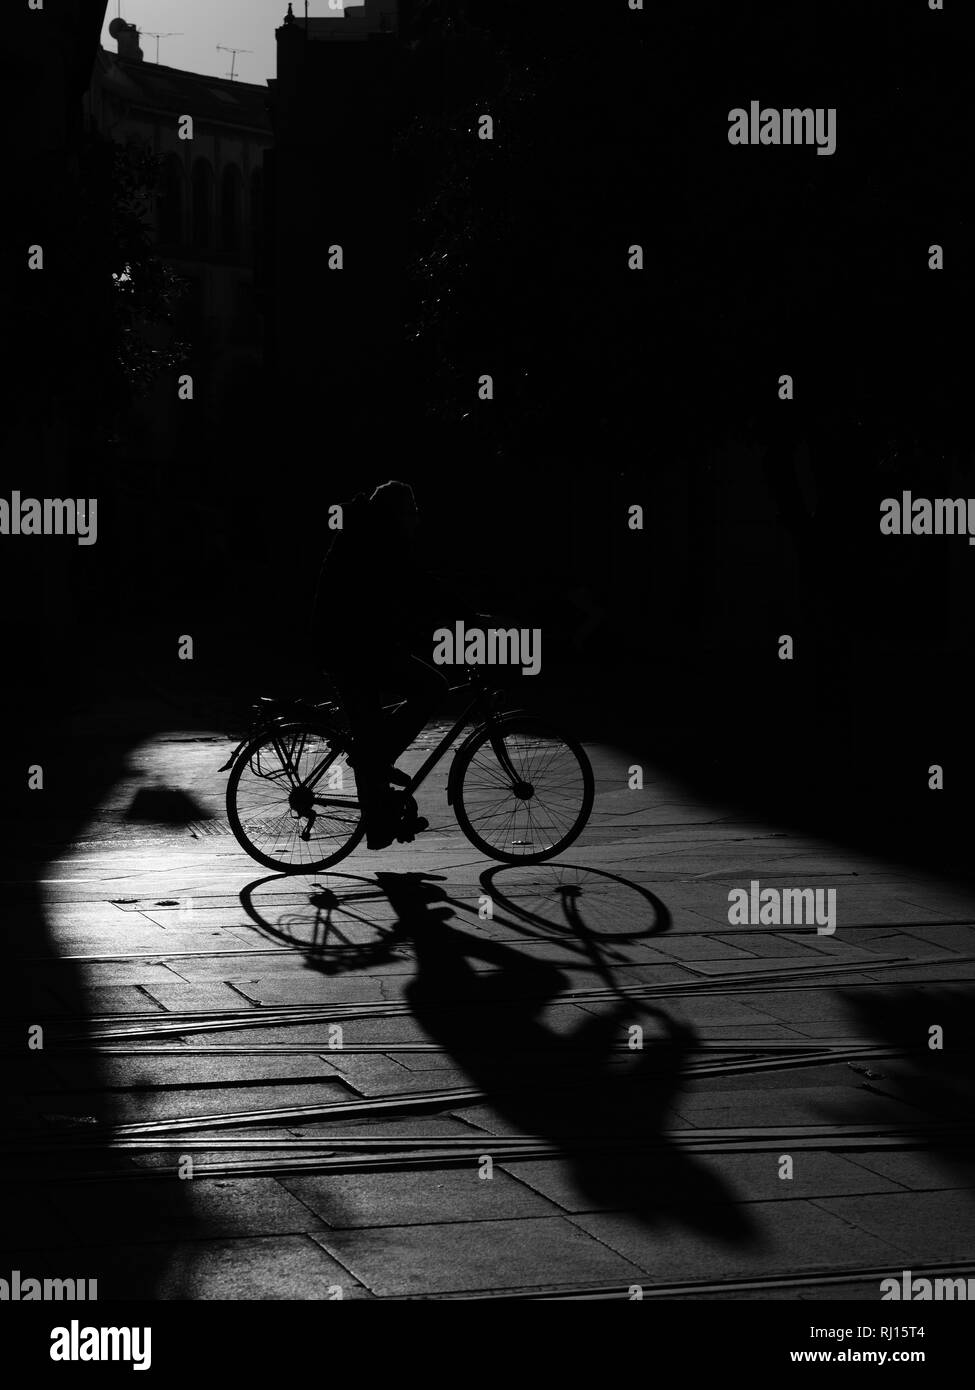 Strong Graphic Shadow Silhouettes of cyclists on bikes in pool of sunlight on street Seville Spain Stock Photo